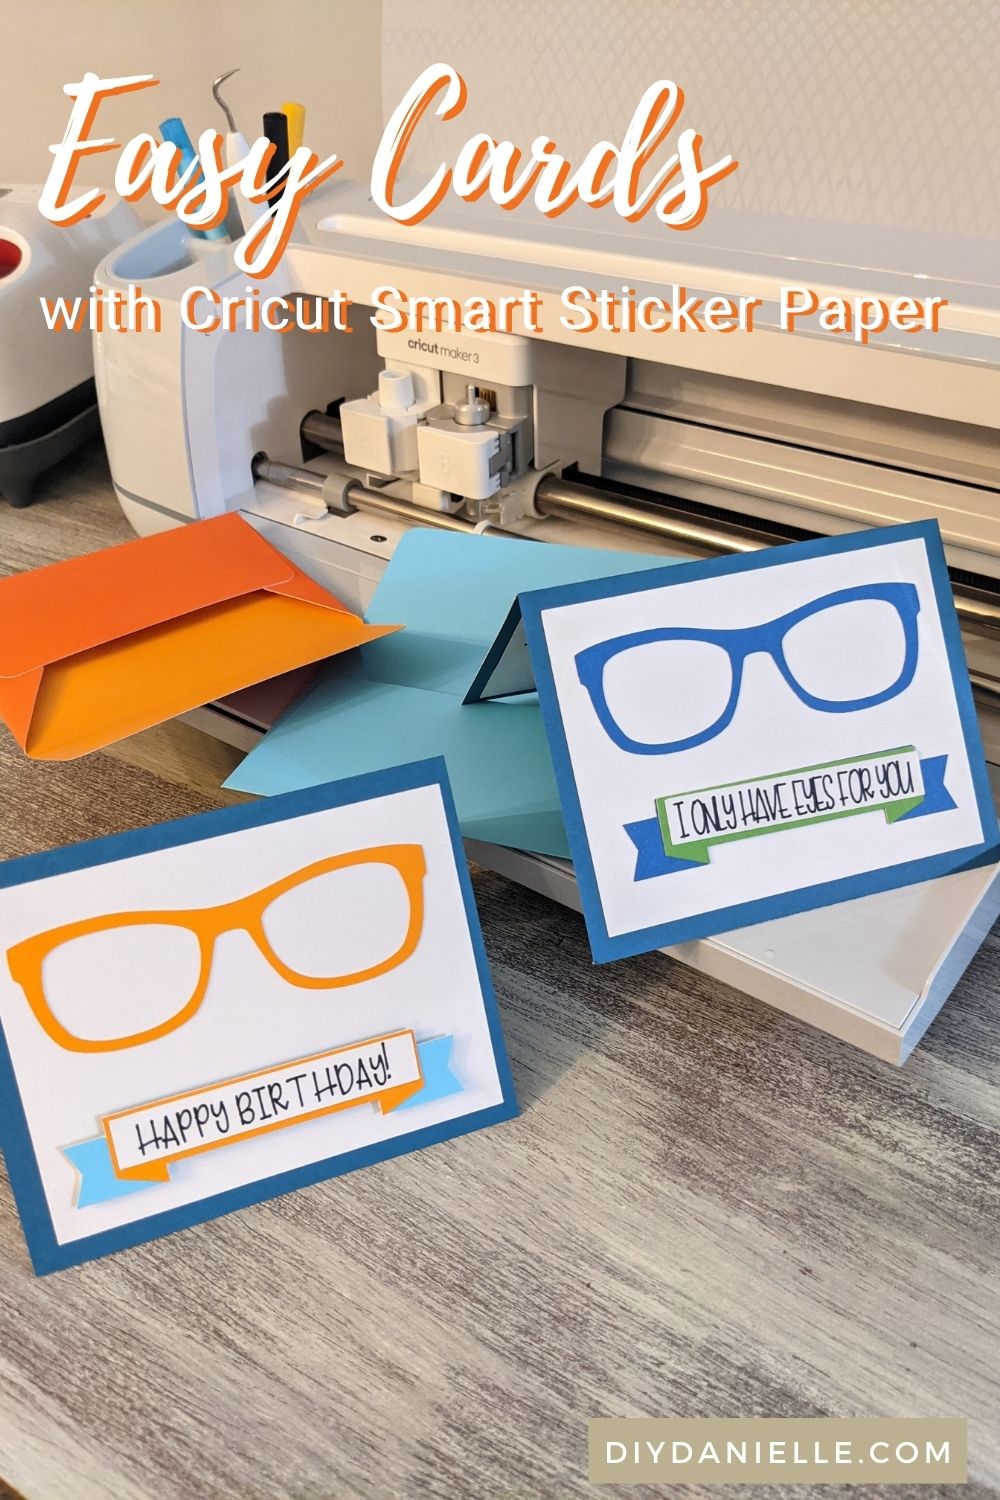 How to Use Smart Paper Sticker Cardstock - DIY Danielle®